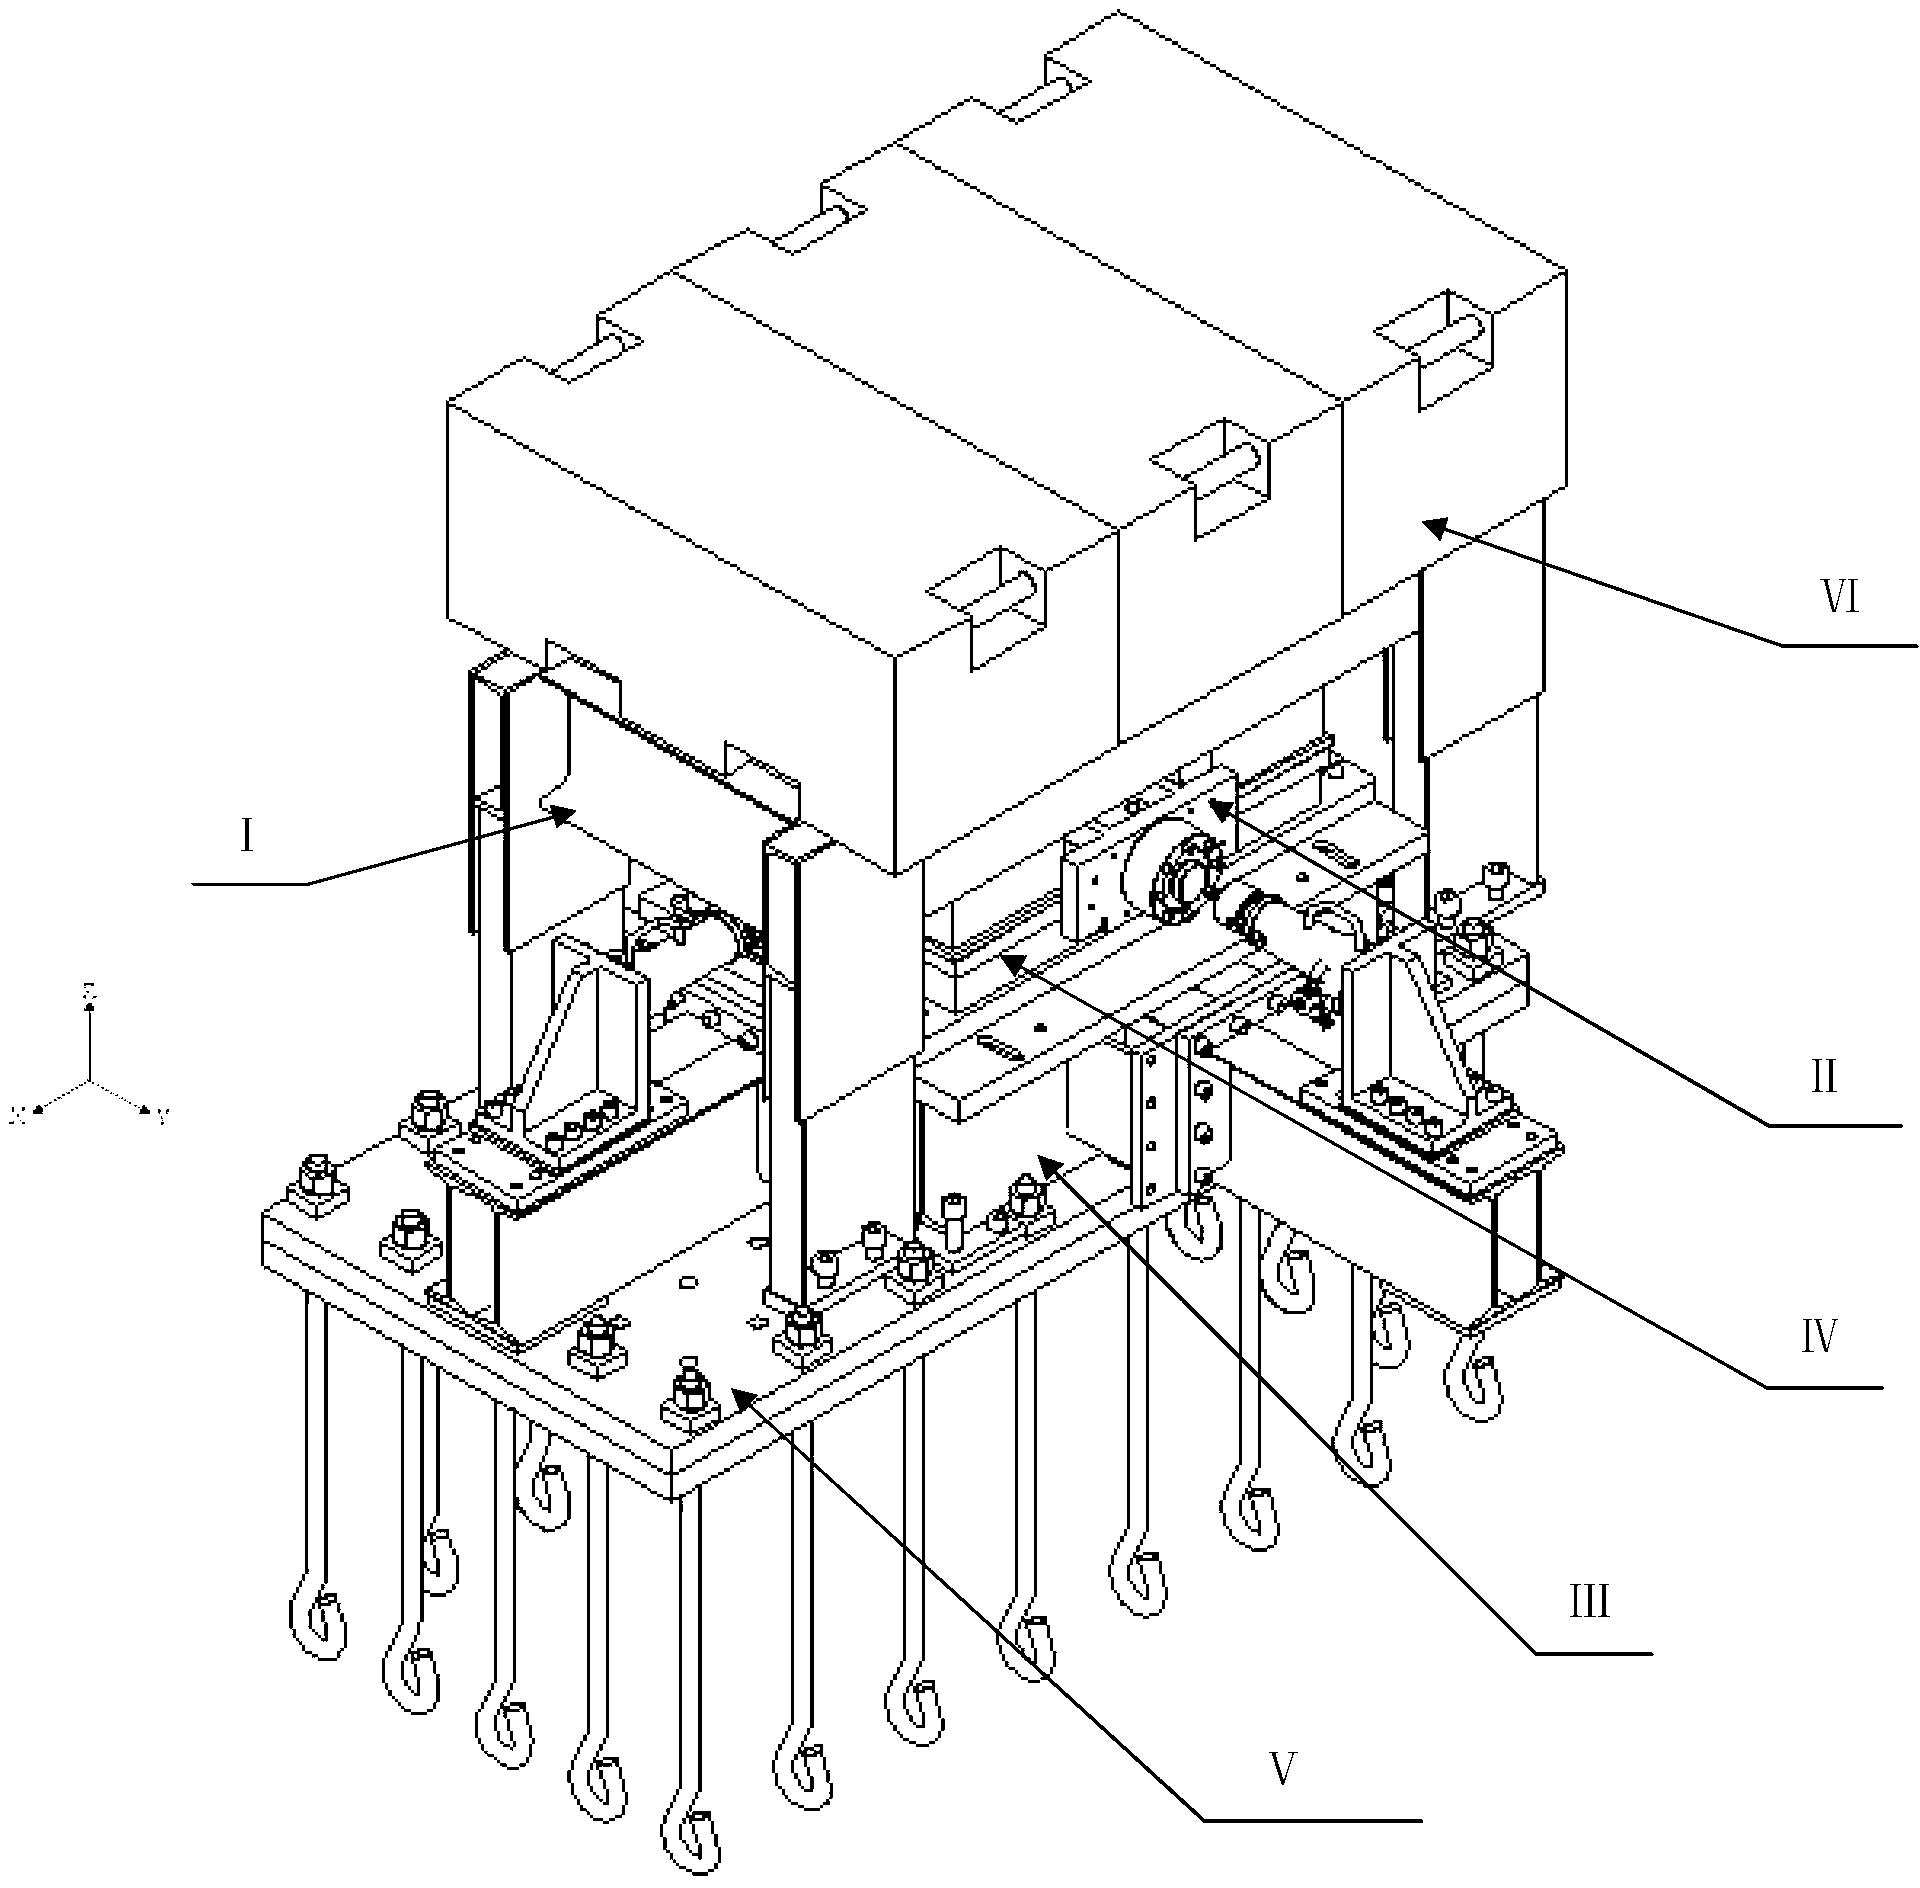 Calibration device for three-dimensional force measuring platform